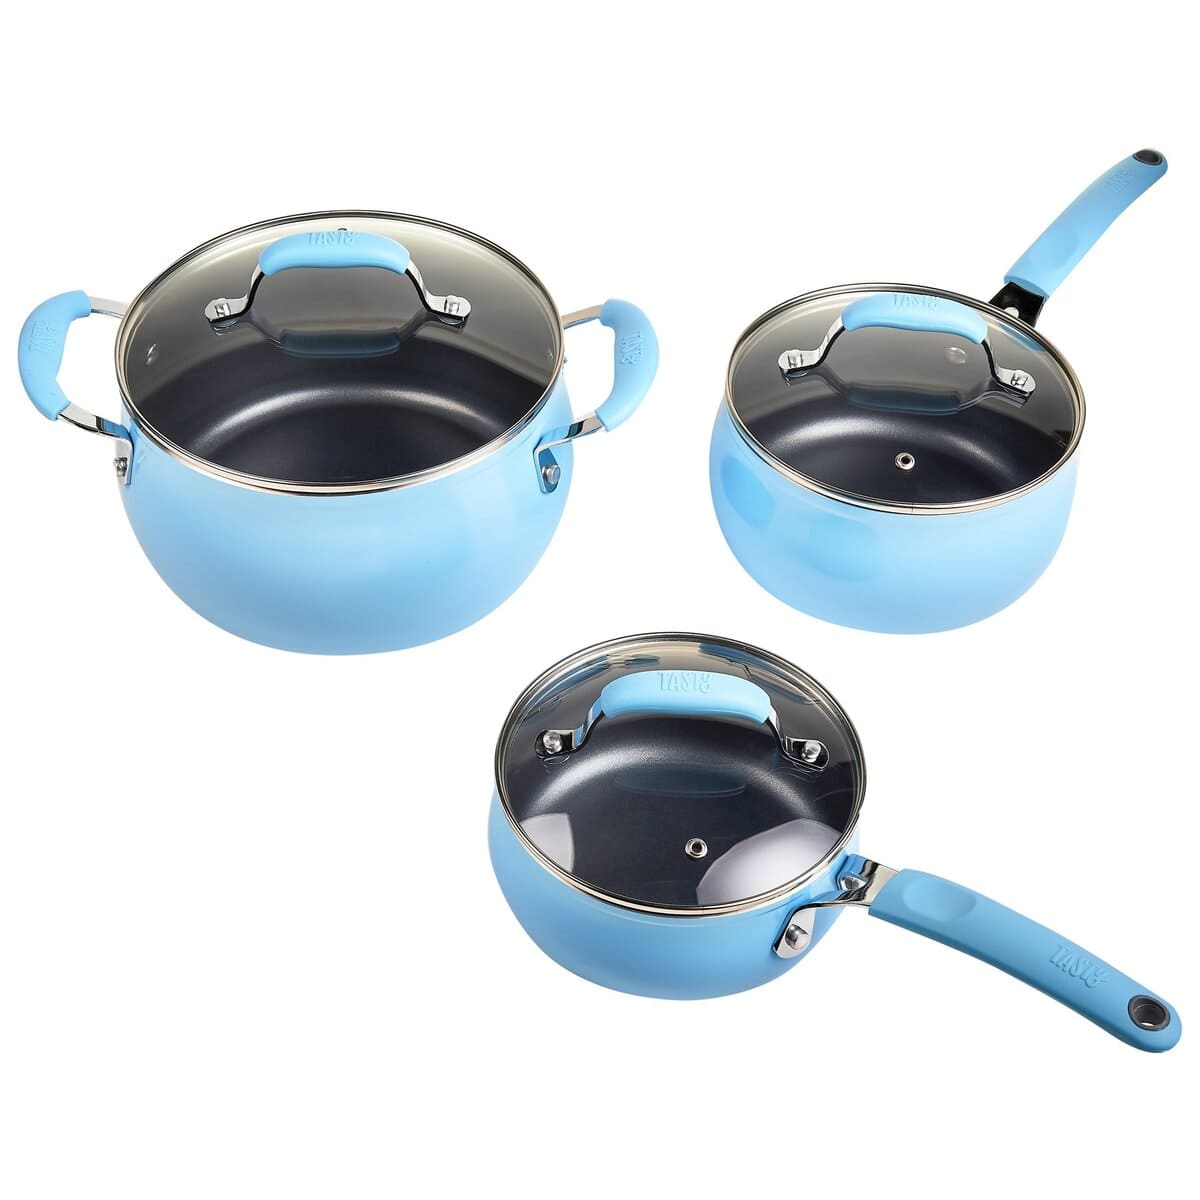 features of the tasty non-stick diamond reinforced cookware set 11 piece